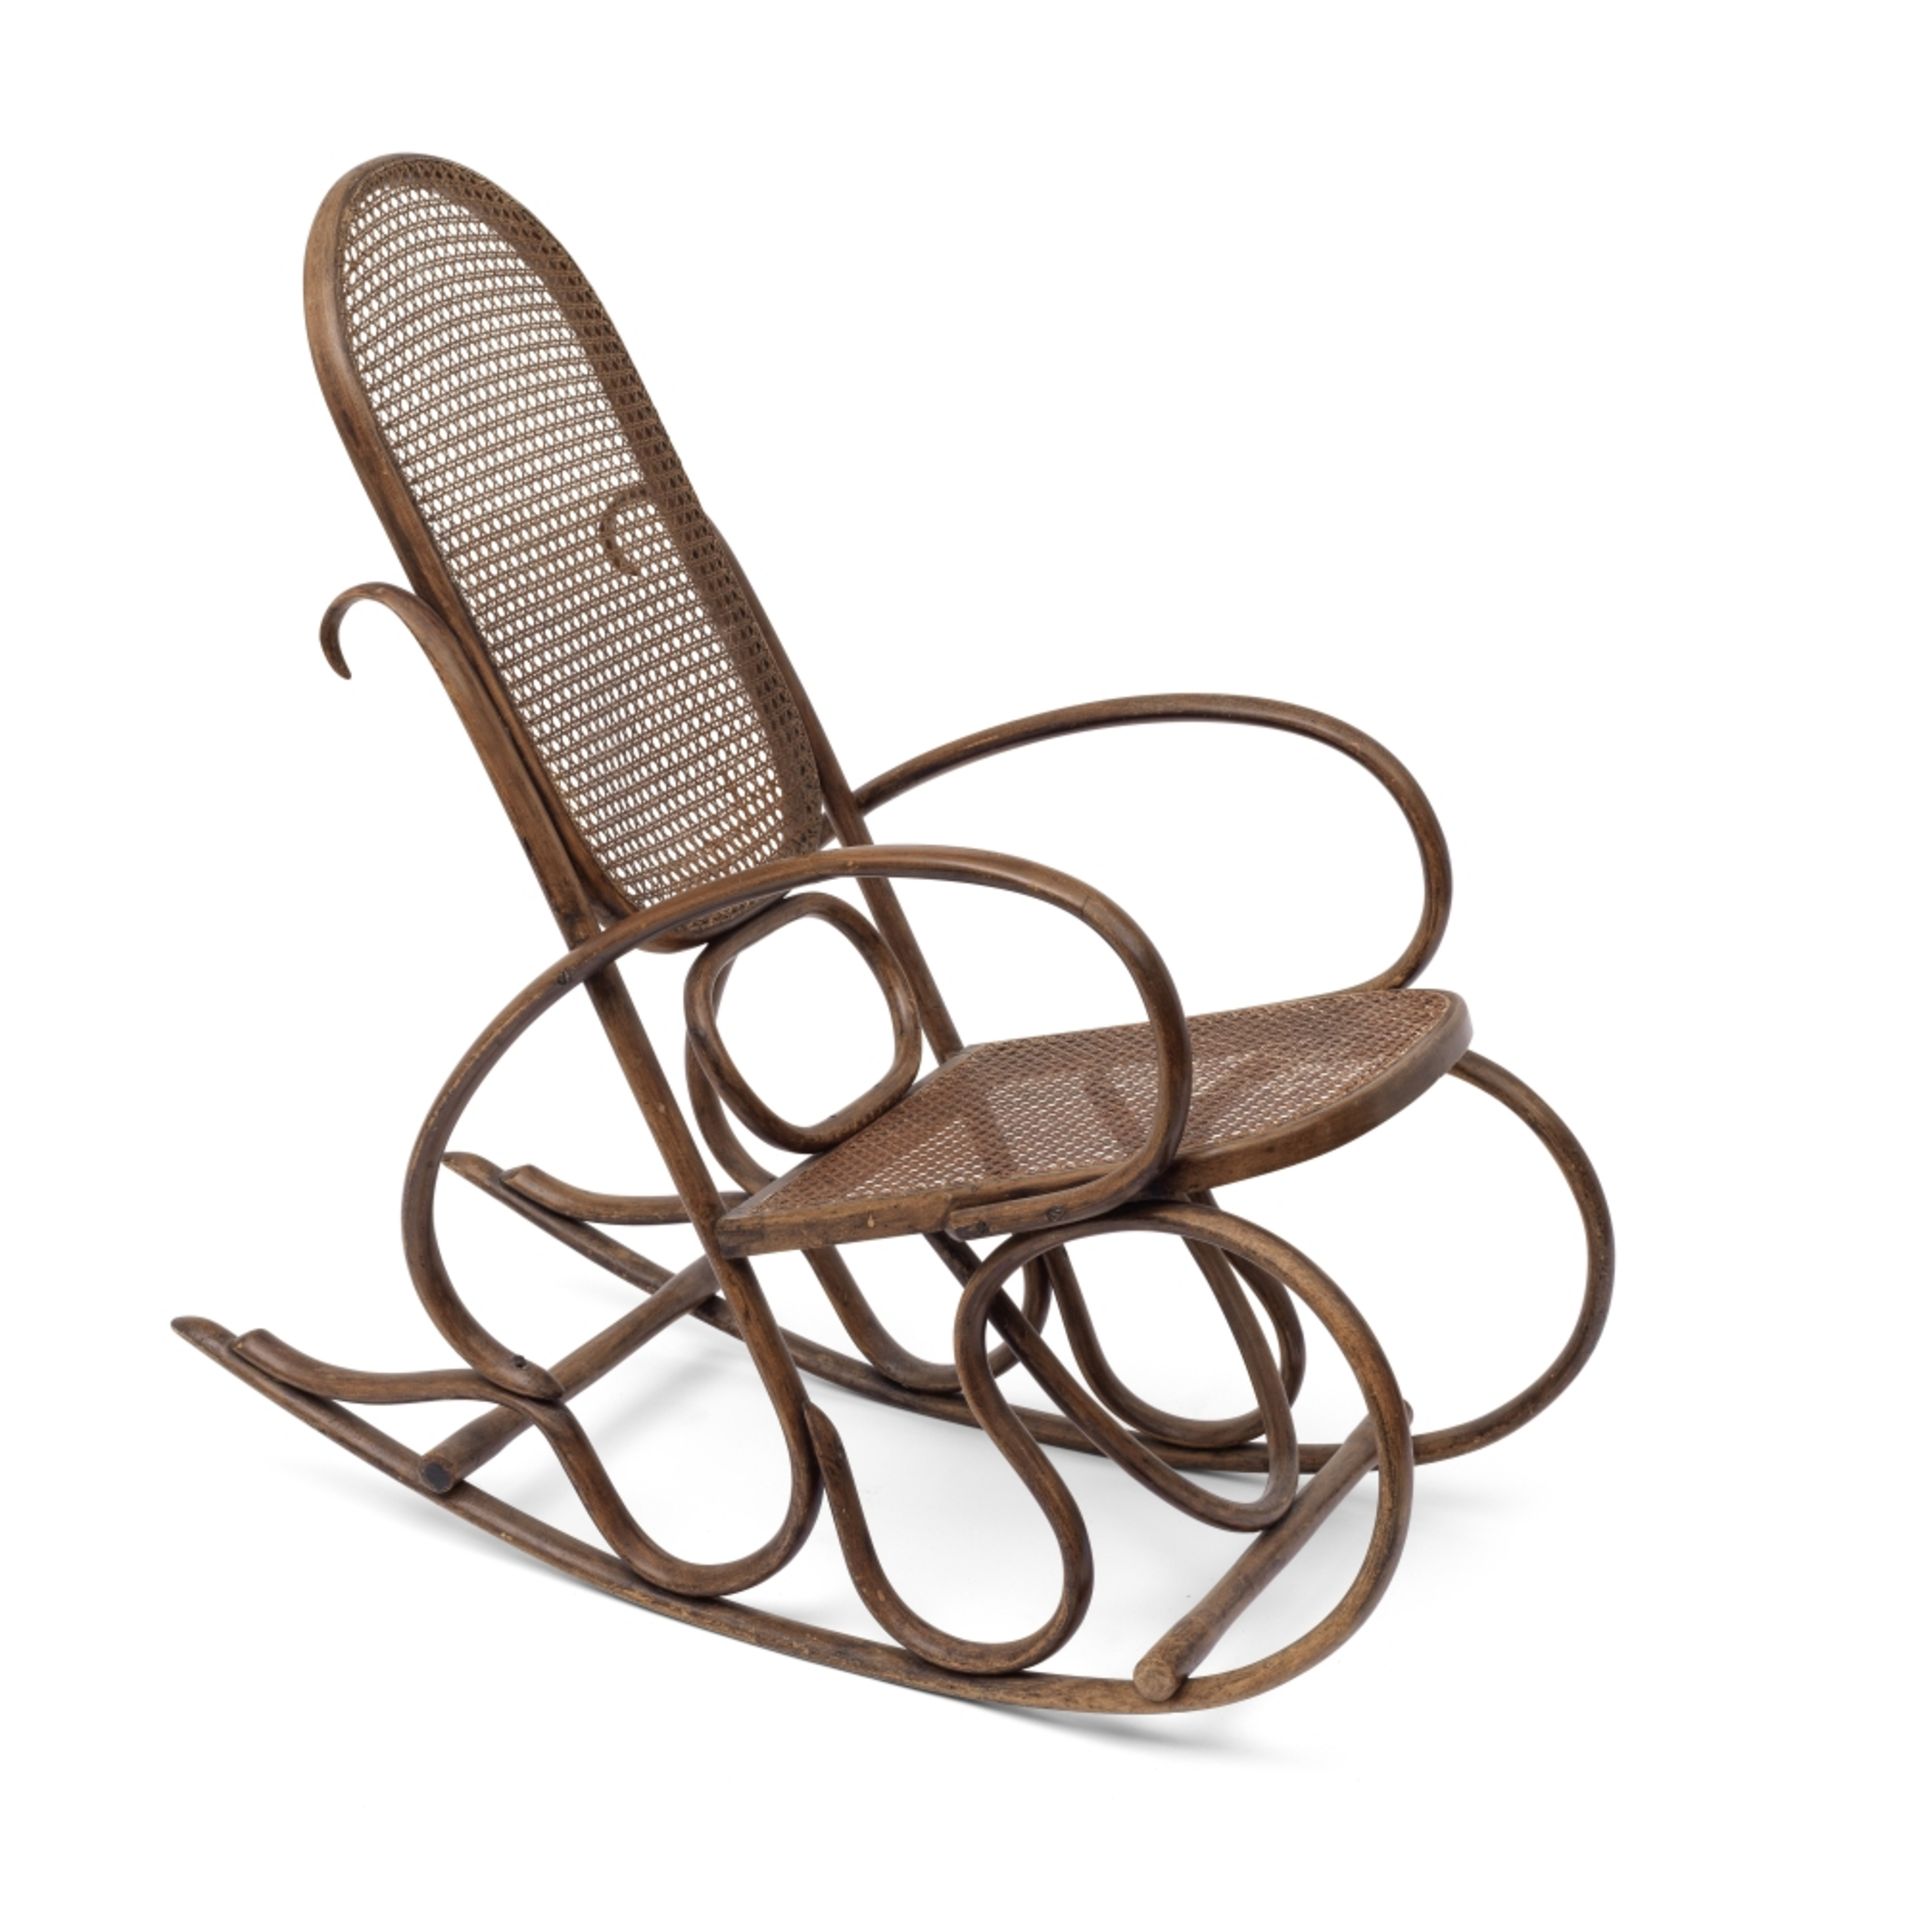 An Austrian bentwood rocking chair In the manner of Thonet